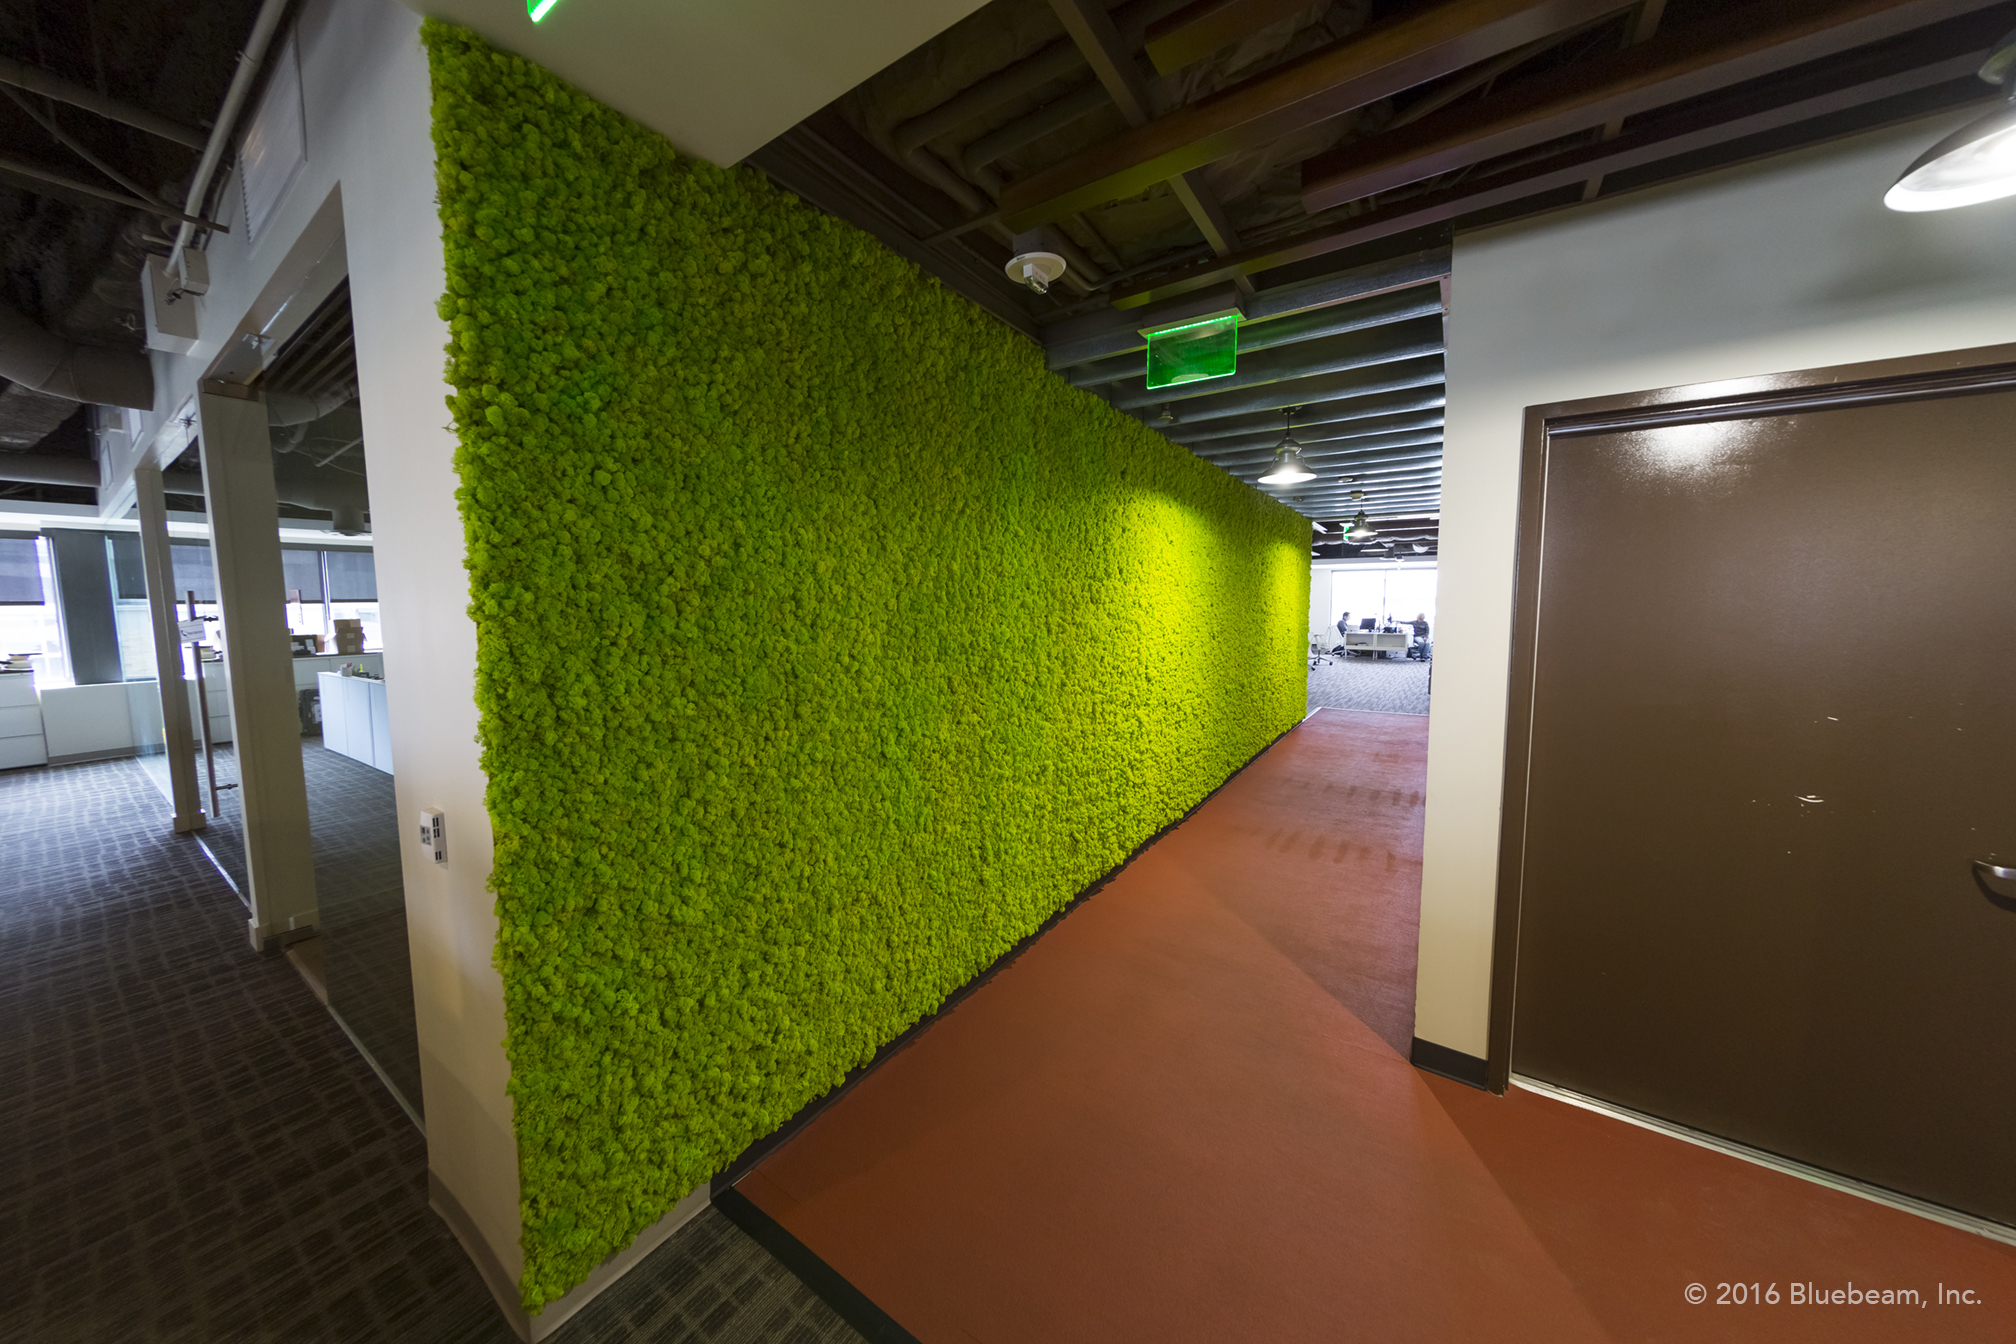 Good Earth Plant Company installed this moss wall at the Bluebeam software company in Pasadena, California, covering three of our hot design trends: moss walls, the WELL building standard, and the color green.